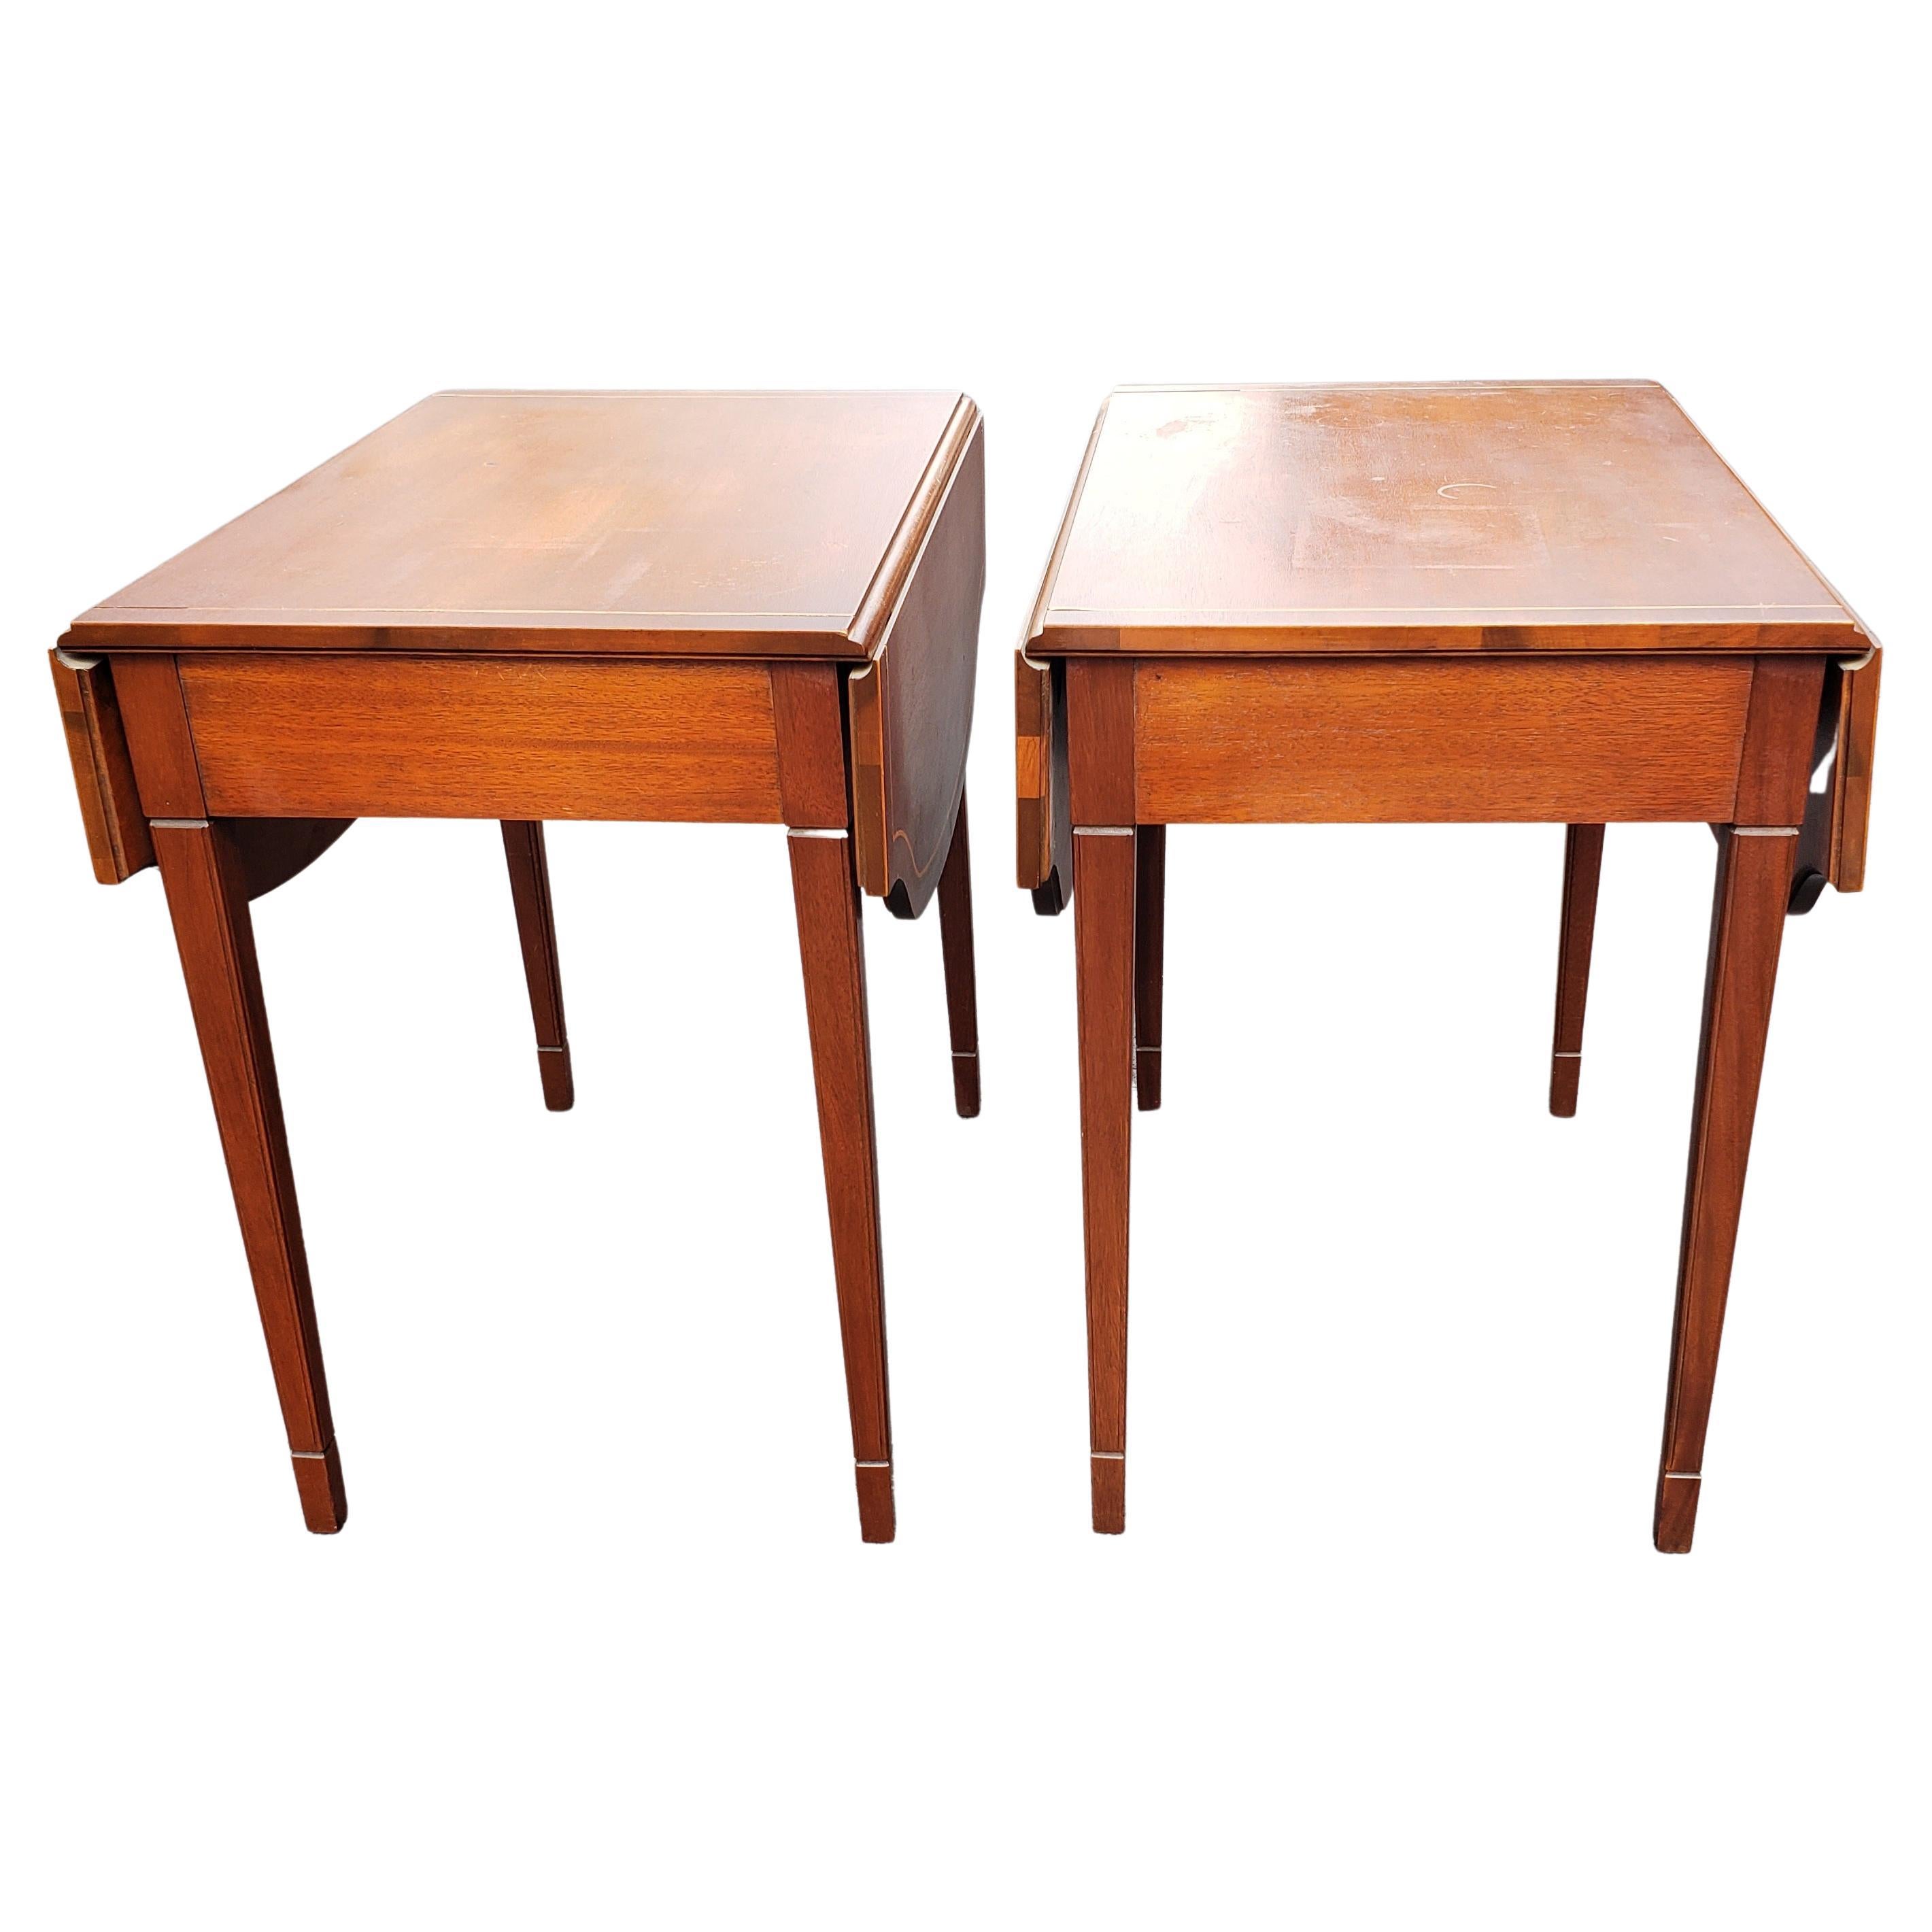 Mid-Century Modern Brandt Certified Genuine Mahogany Pembroke Drop-Leaf Tables, a Pair, circa 1940s For Sale